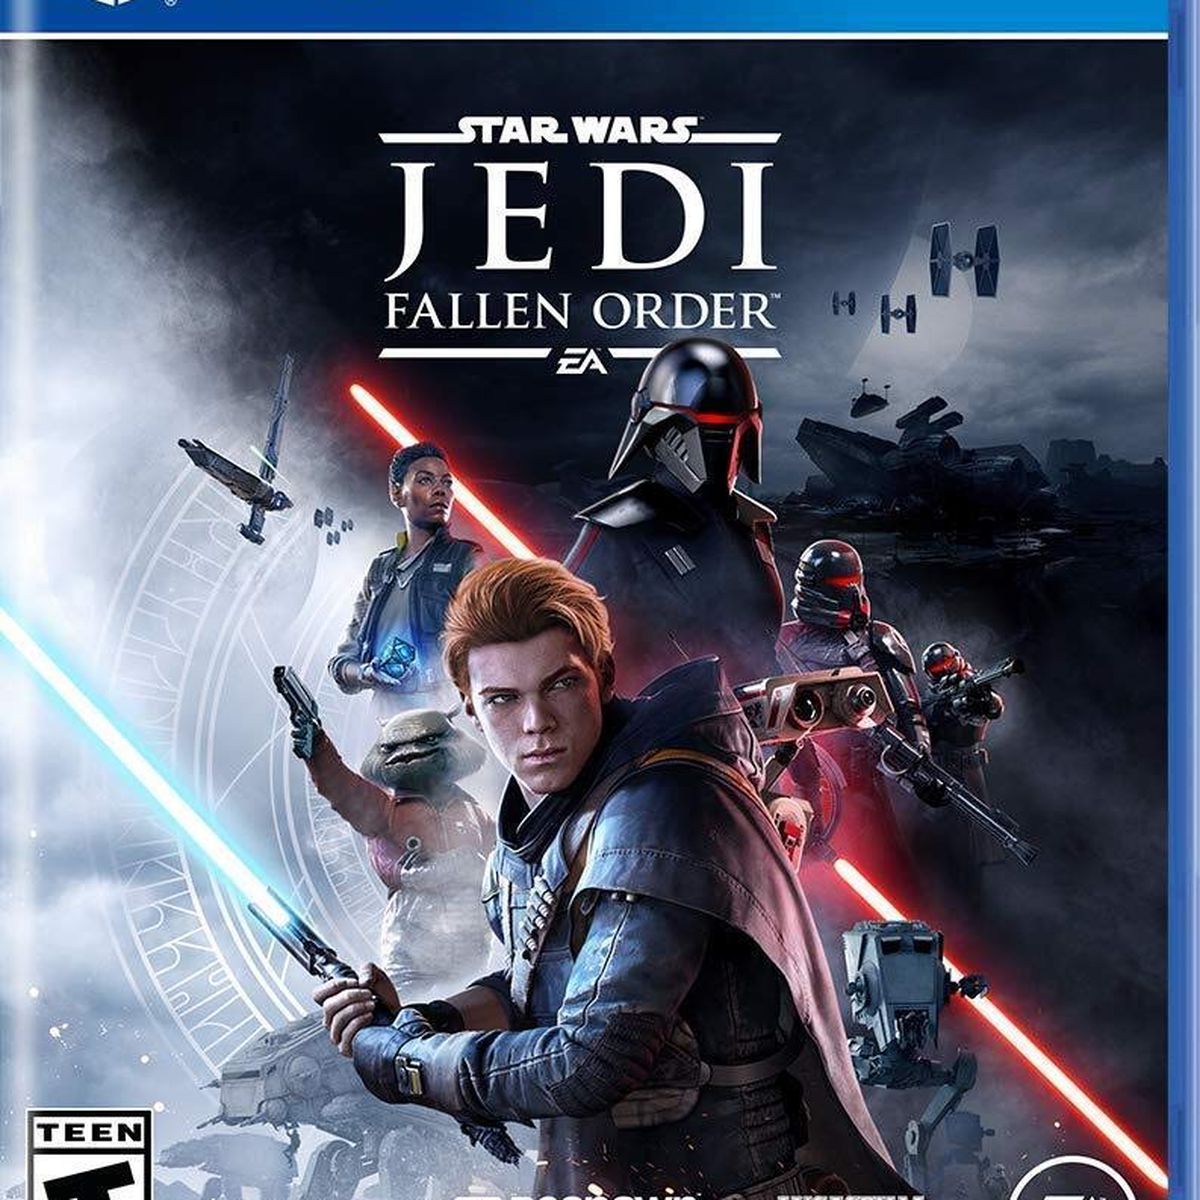 Cover art for Star Wars Jedi: Fallen Order on PS4